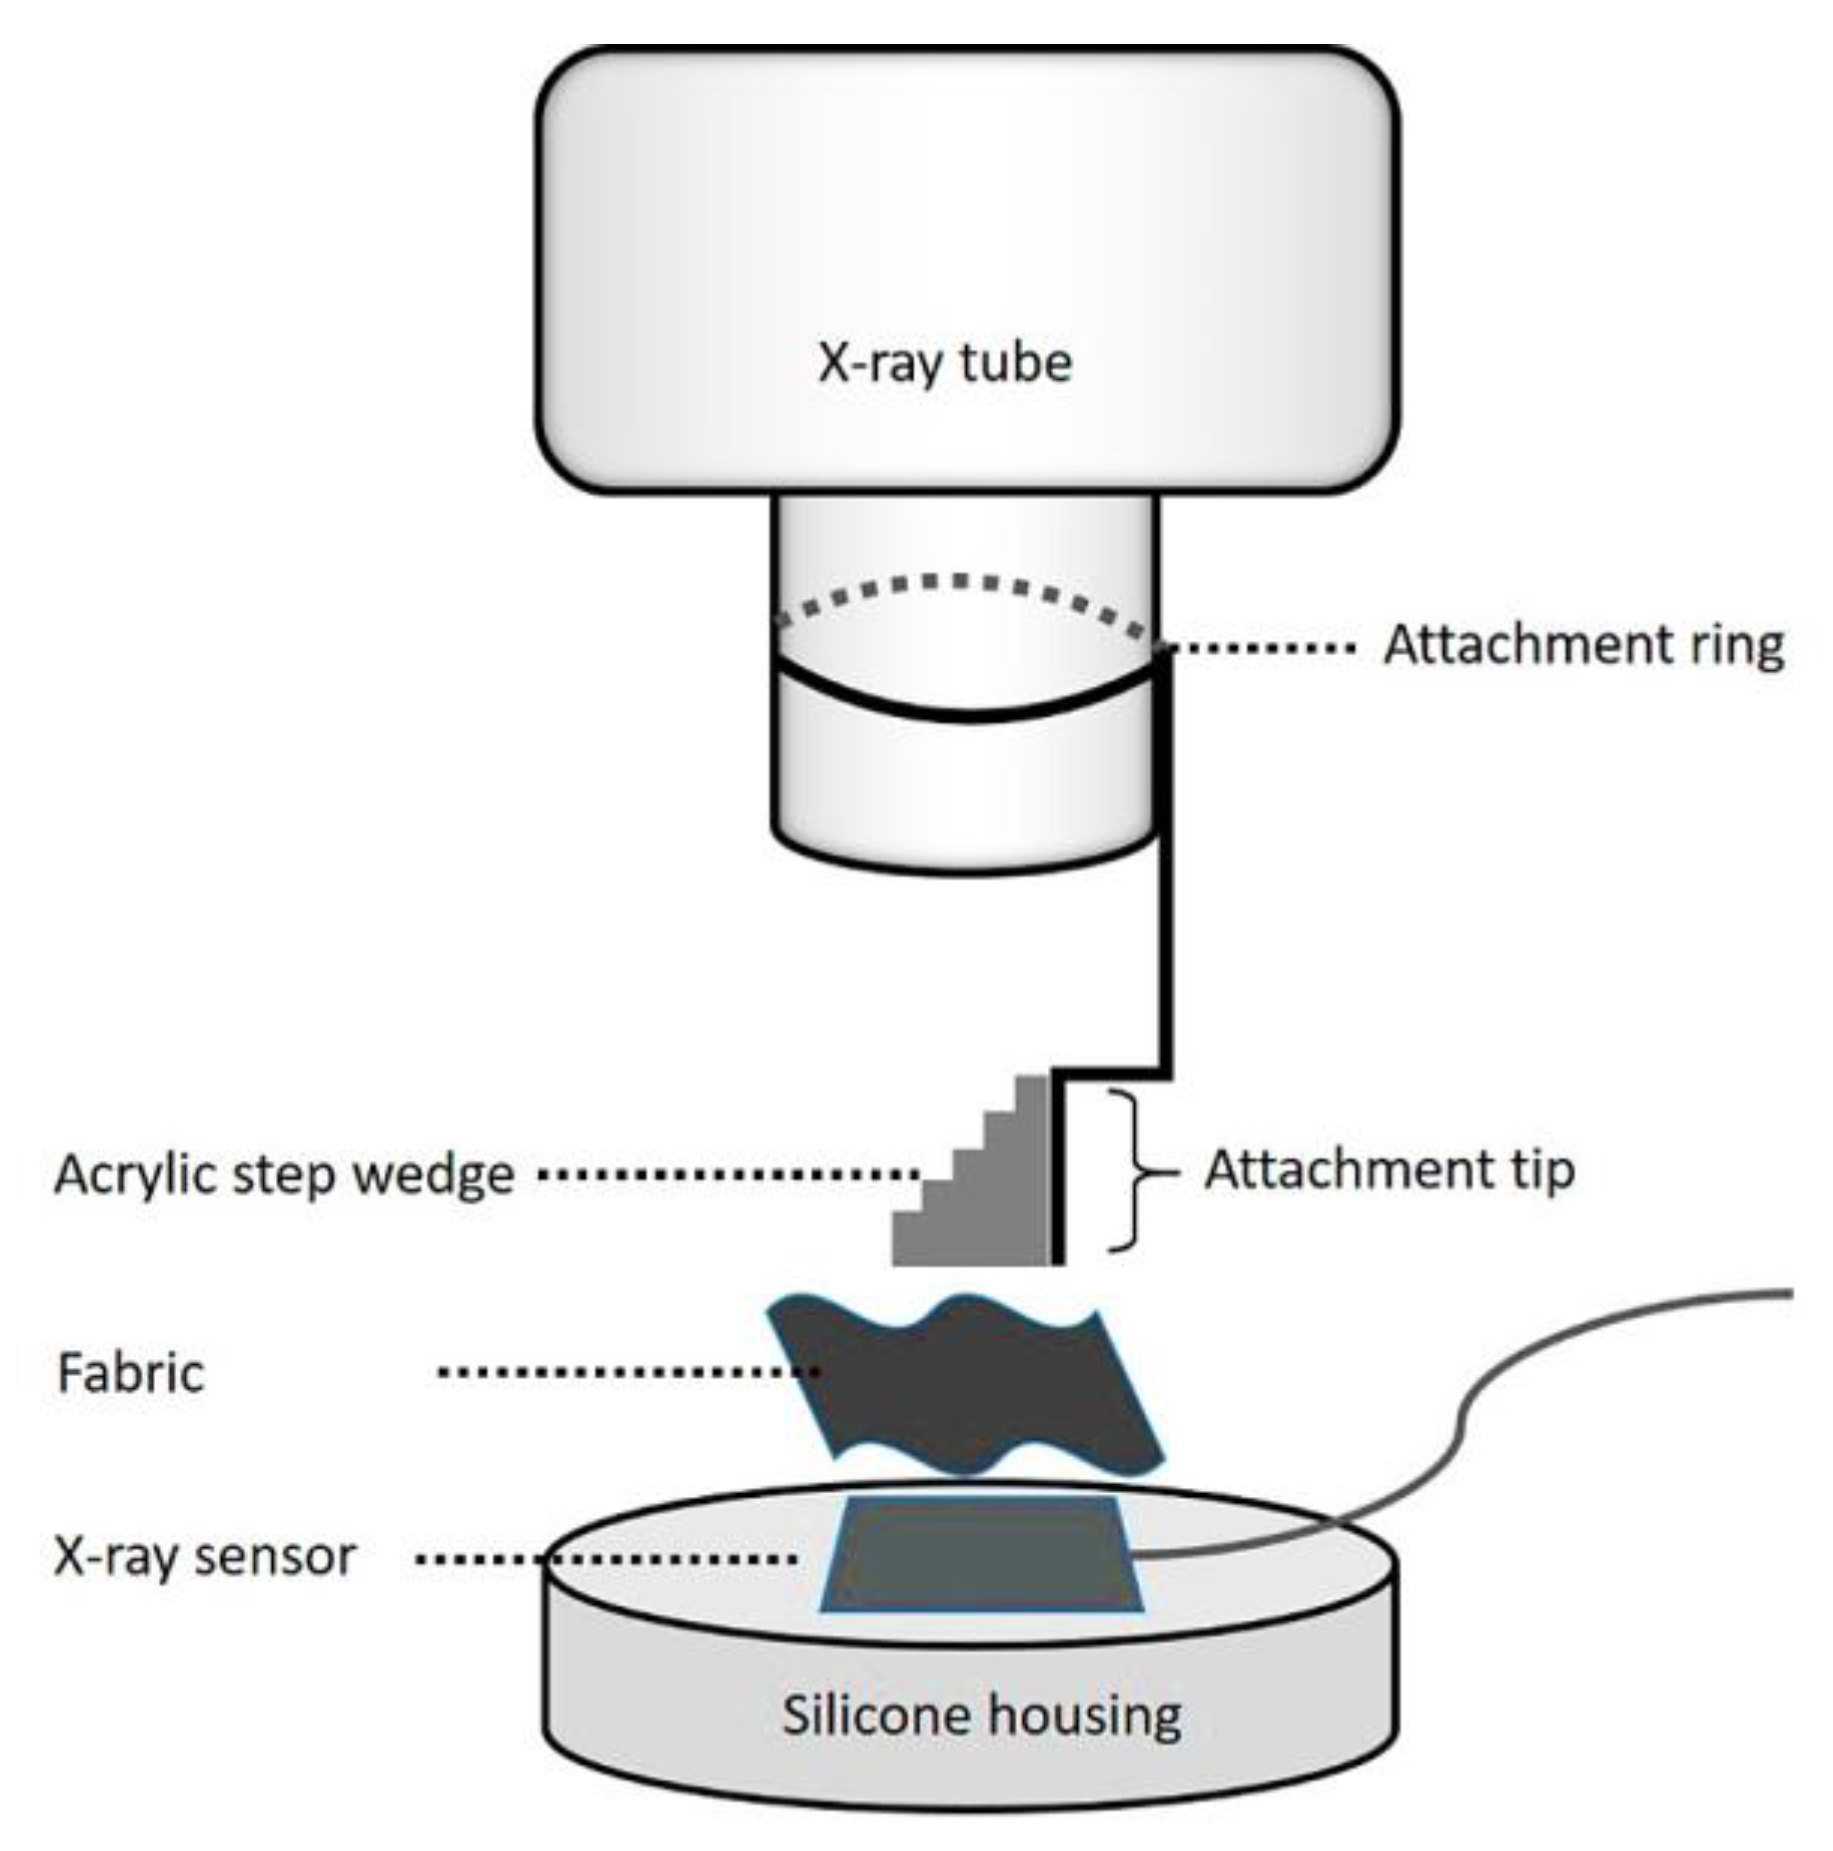 Polymeric composite materials for radiation shielding: a review